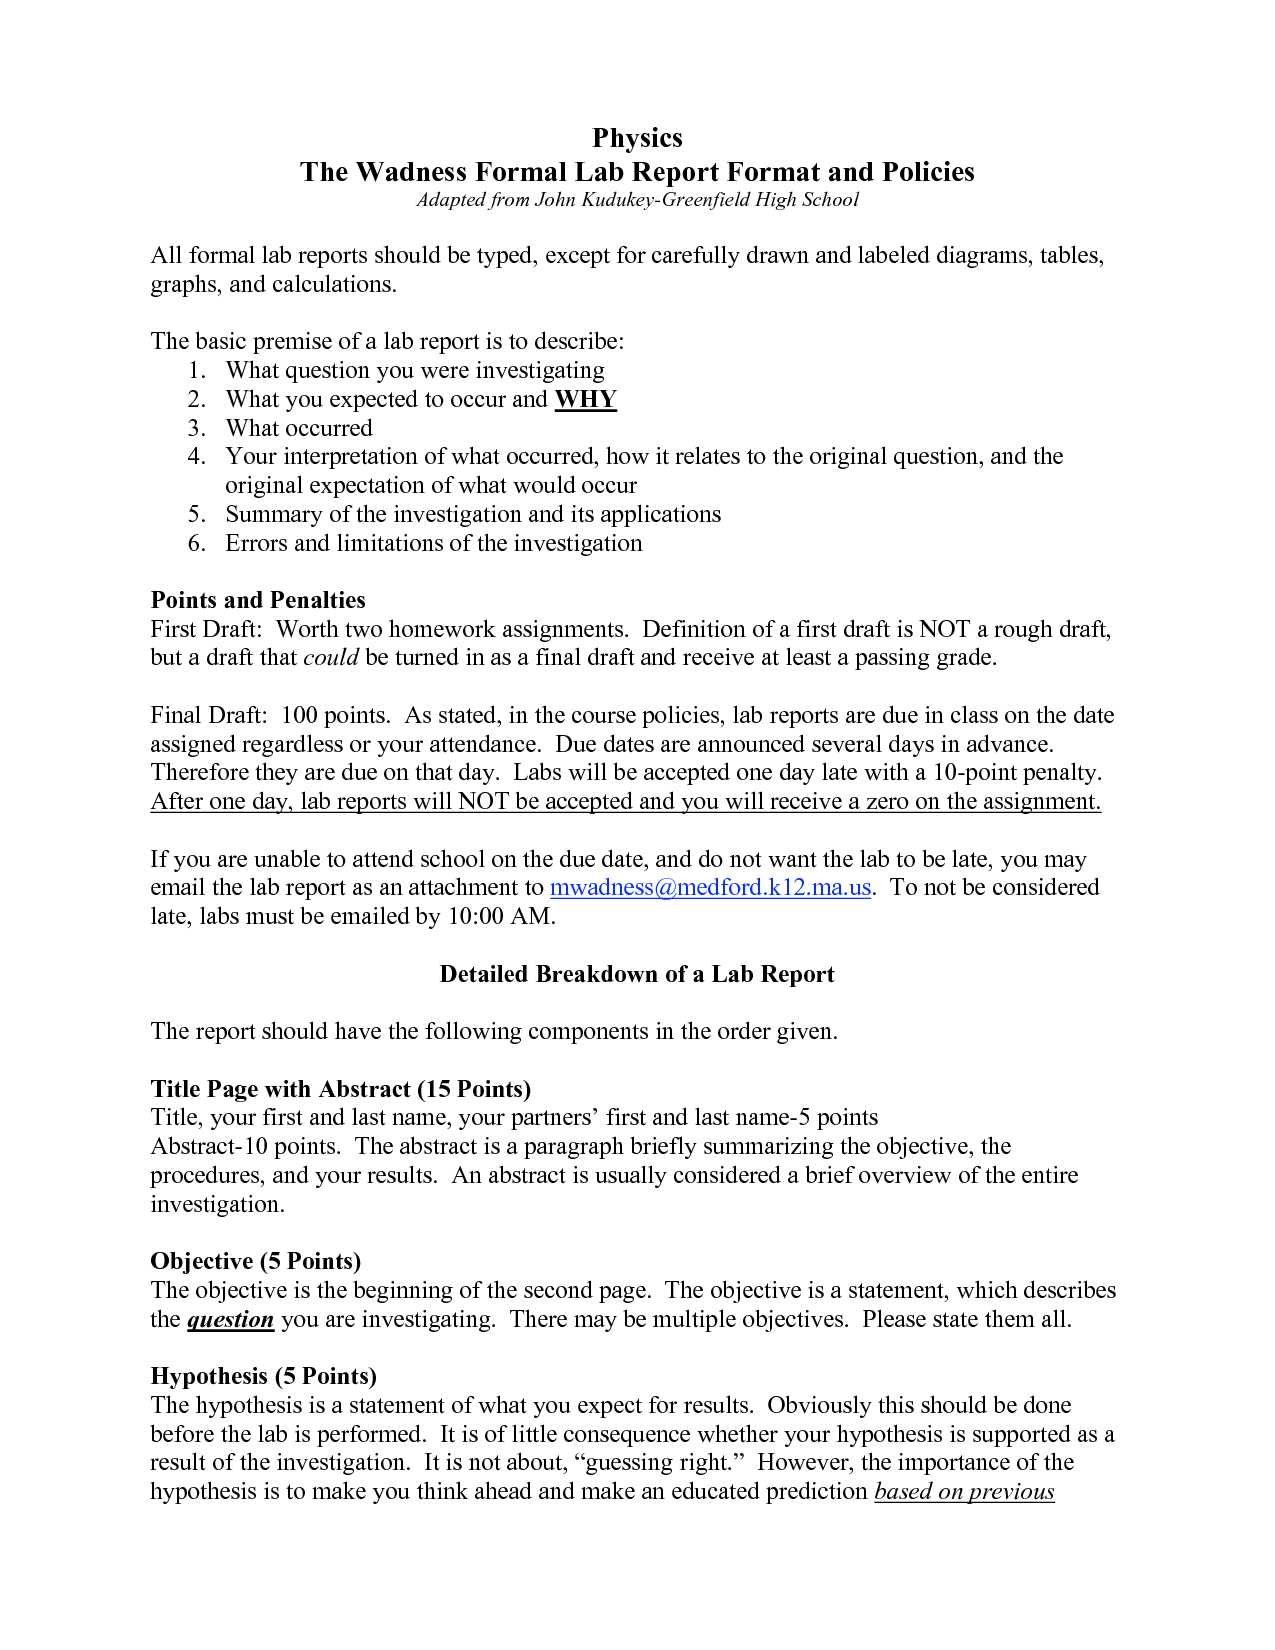 Formal Lab Report Template Physics : Biological Science Intended For Formal Lab Report Template